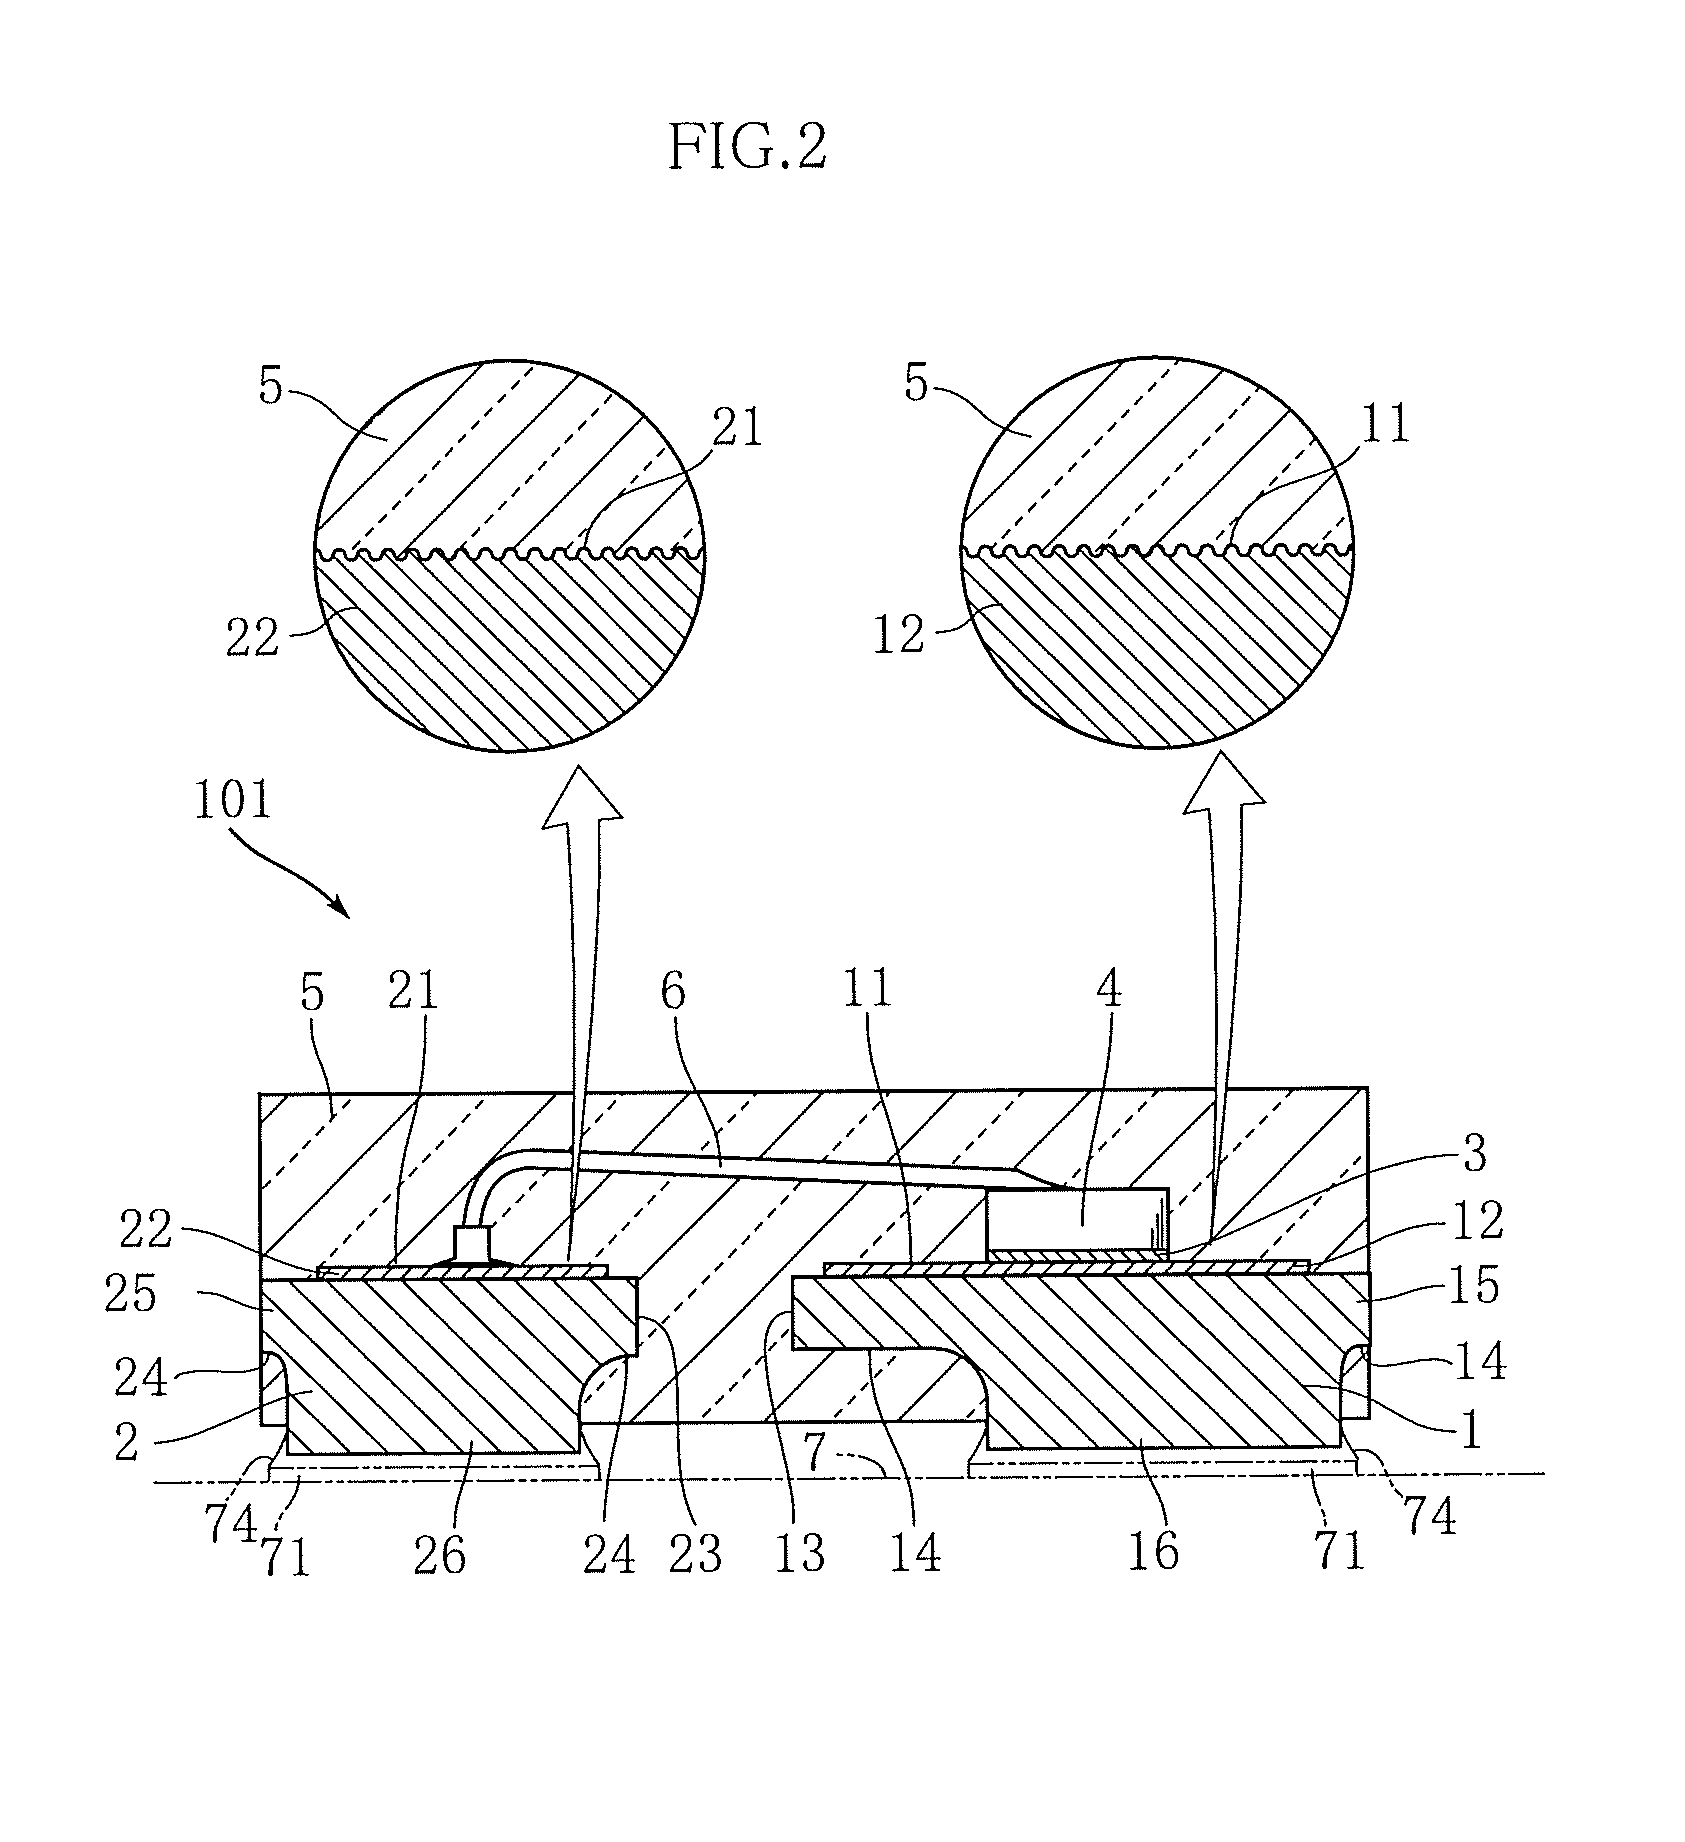 Semiconductor light-emitting device, method for producing same, and display device